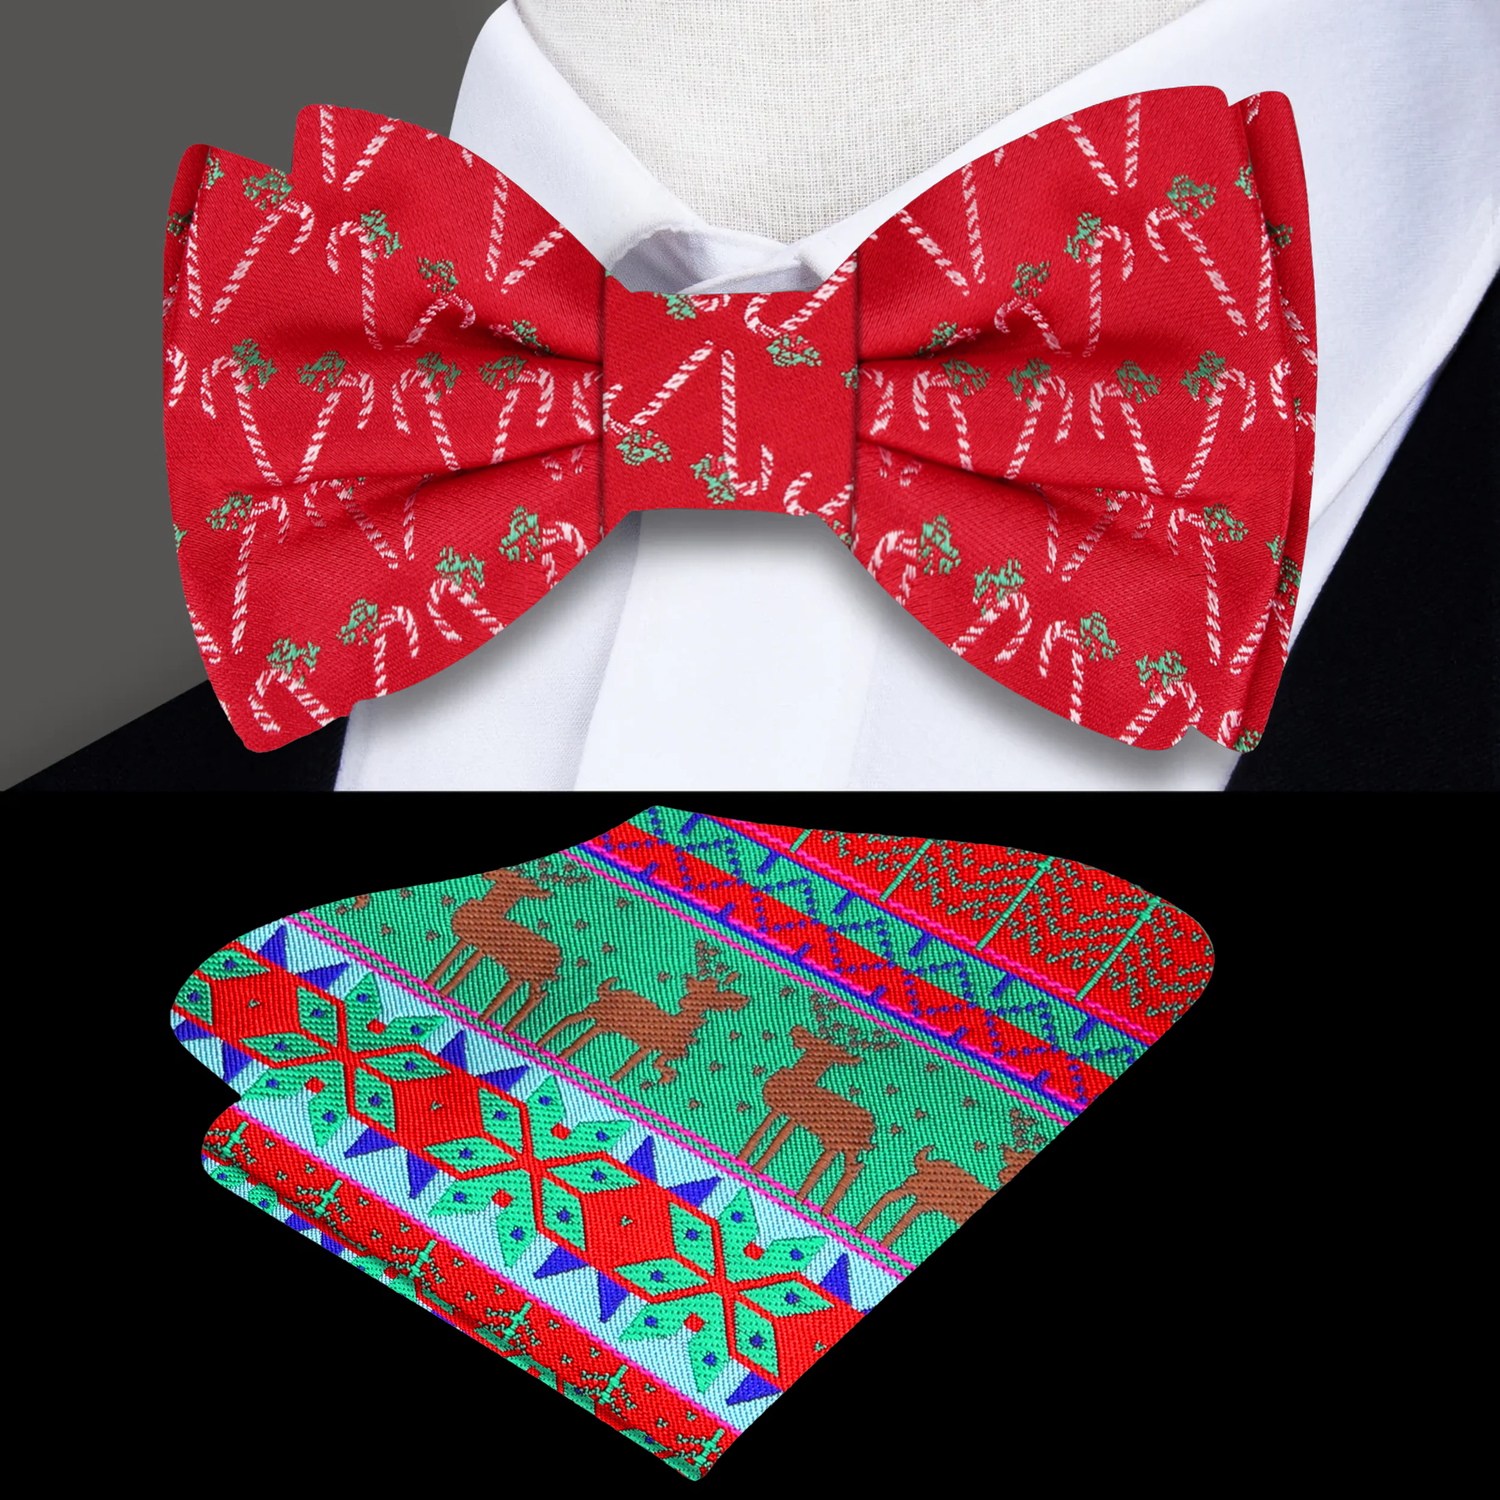 Red, White and Green Candy Cane Bow Tie and Accenting Pocket Square